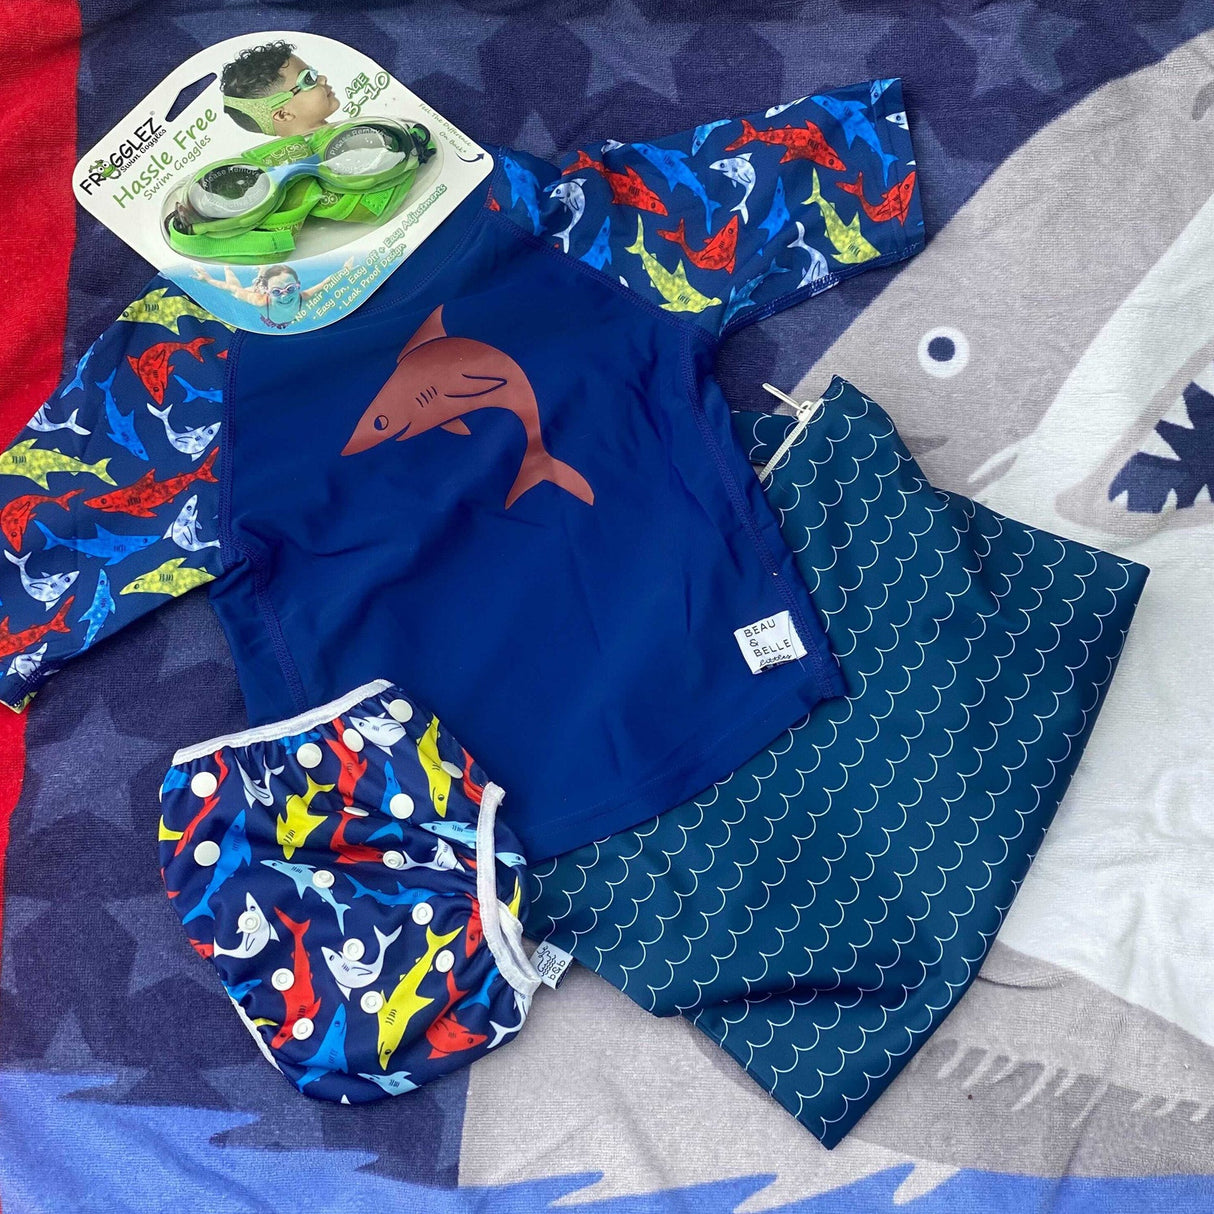 Swim Starter Kit for Babies and Toddlers by Beau & Belle Littles